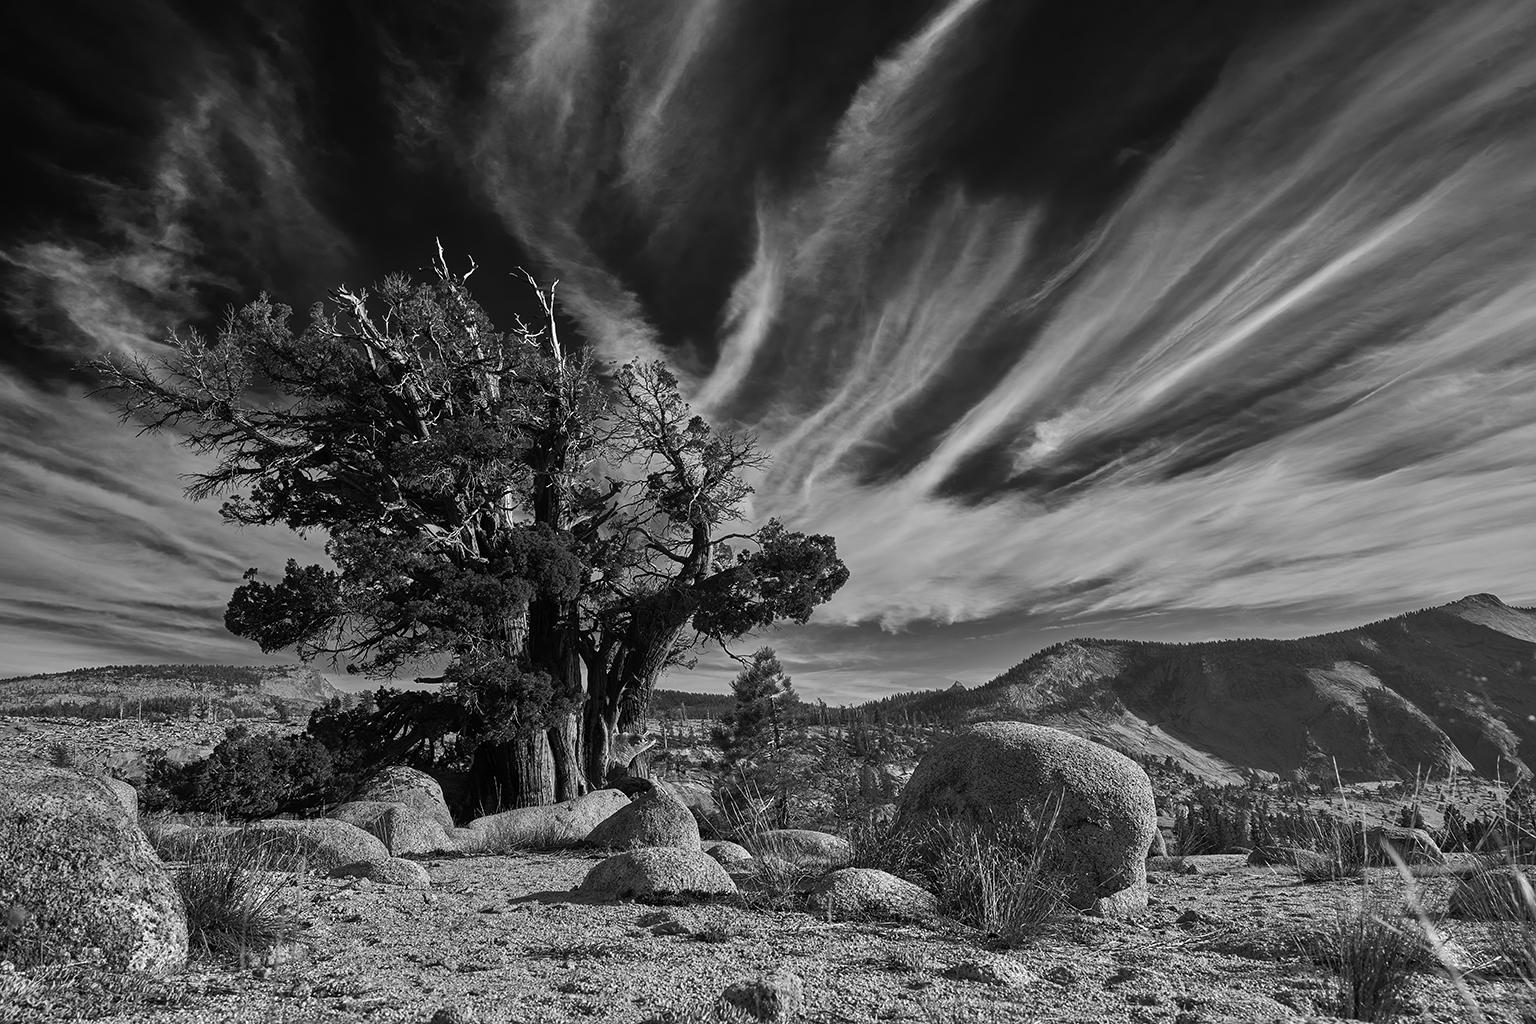 Tree Study III - large format b/w photograph of lone ancient tree in landscape - Contemporary Photograph by Frank Schott